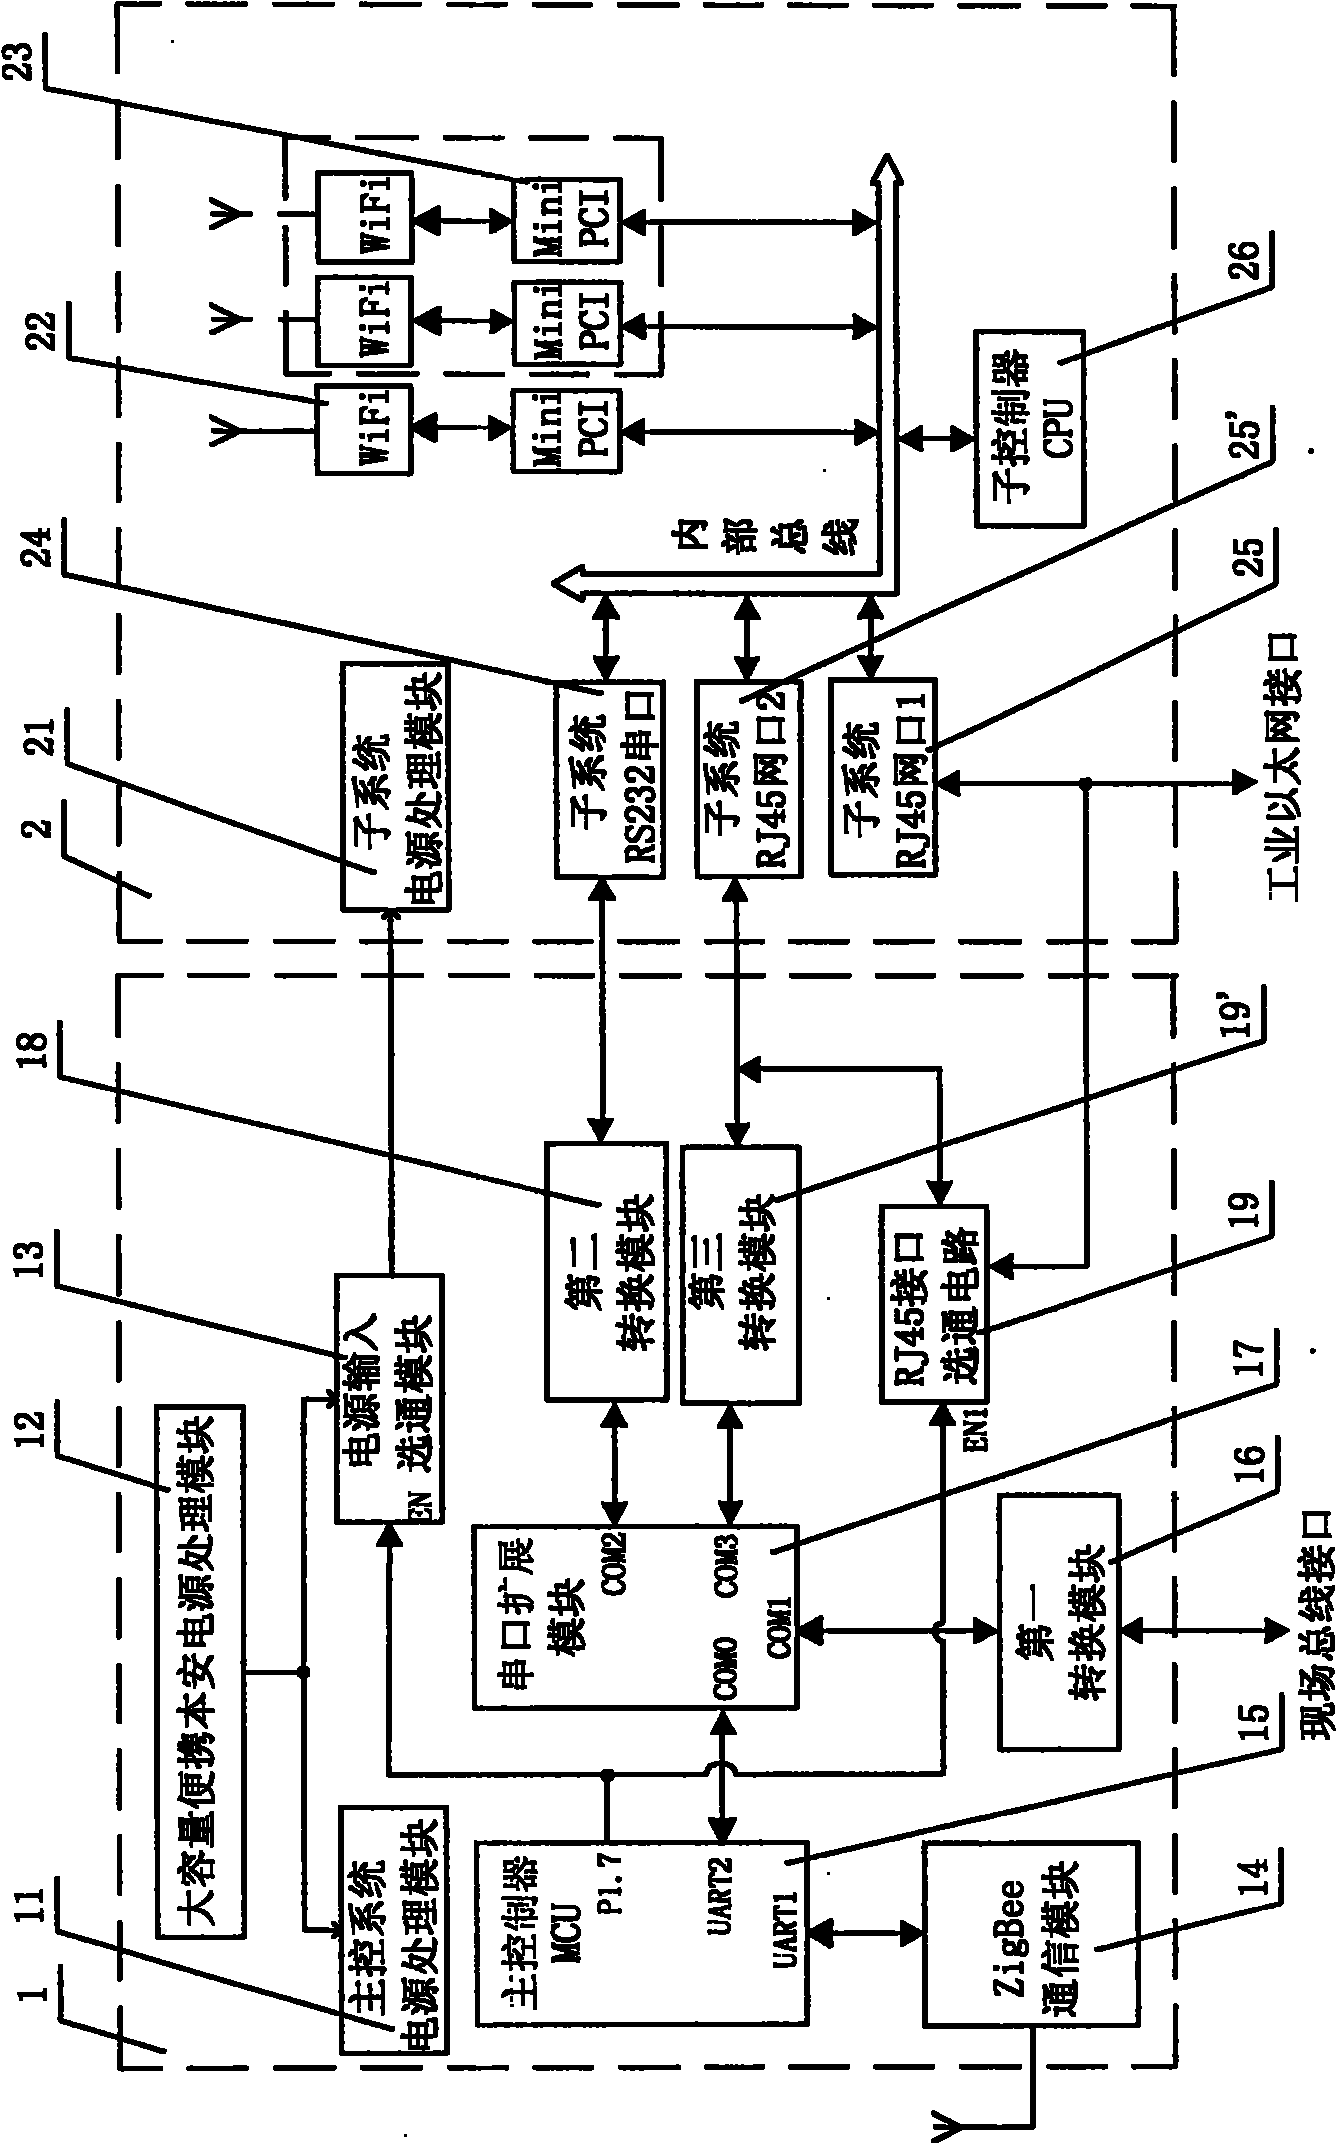 Multifunctional wireless Mesh gateway device for multi-RF (Radio Frequency) mine and control system thereof